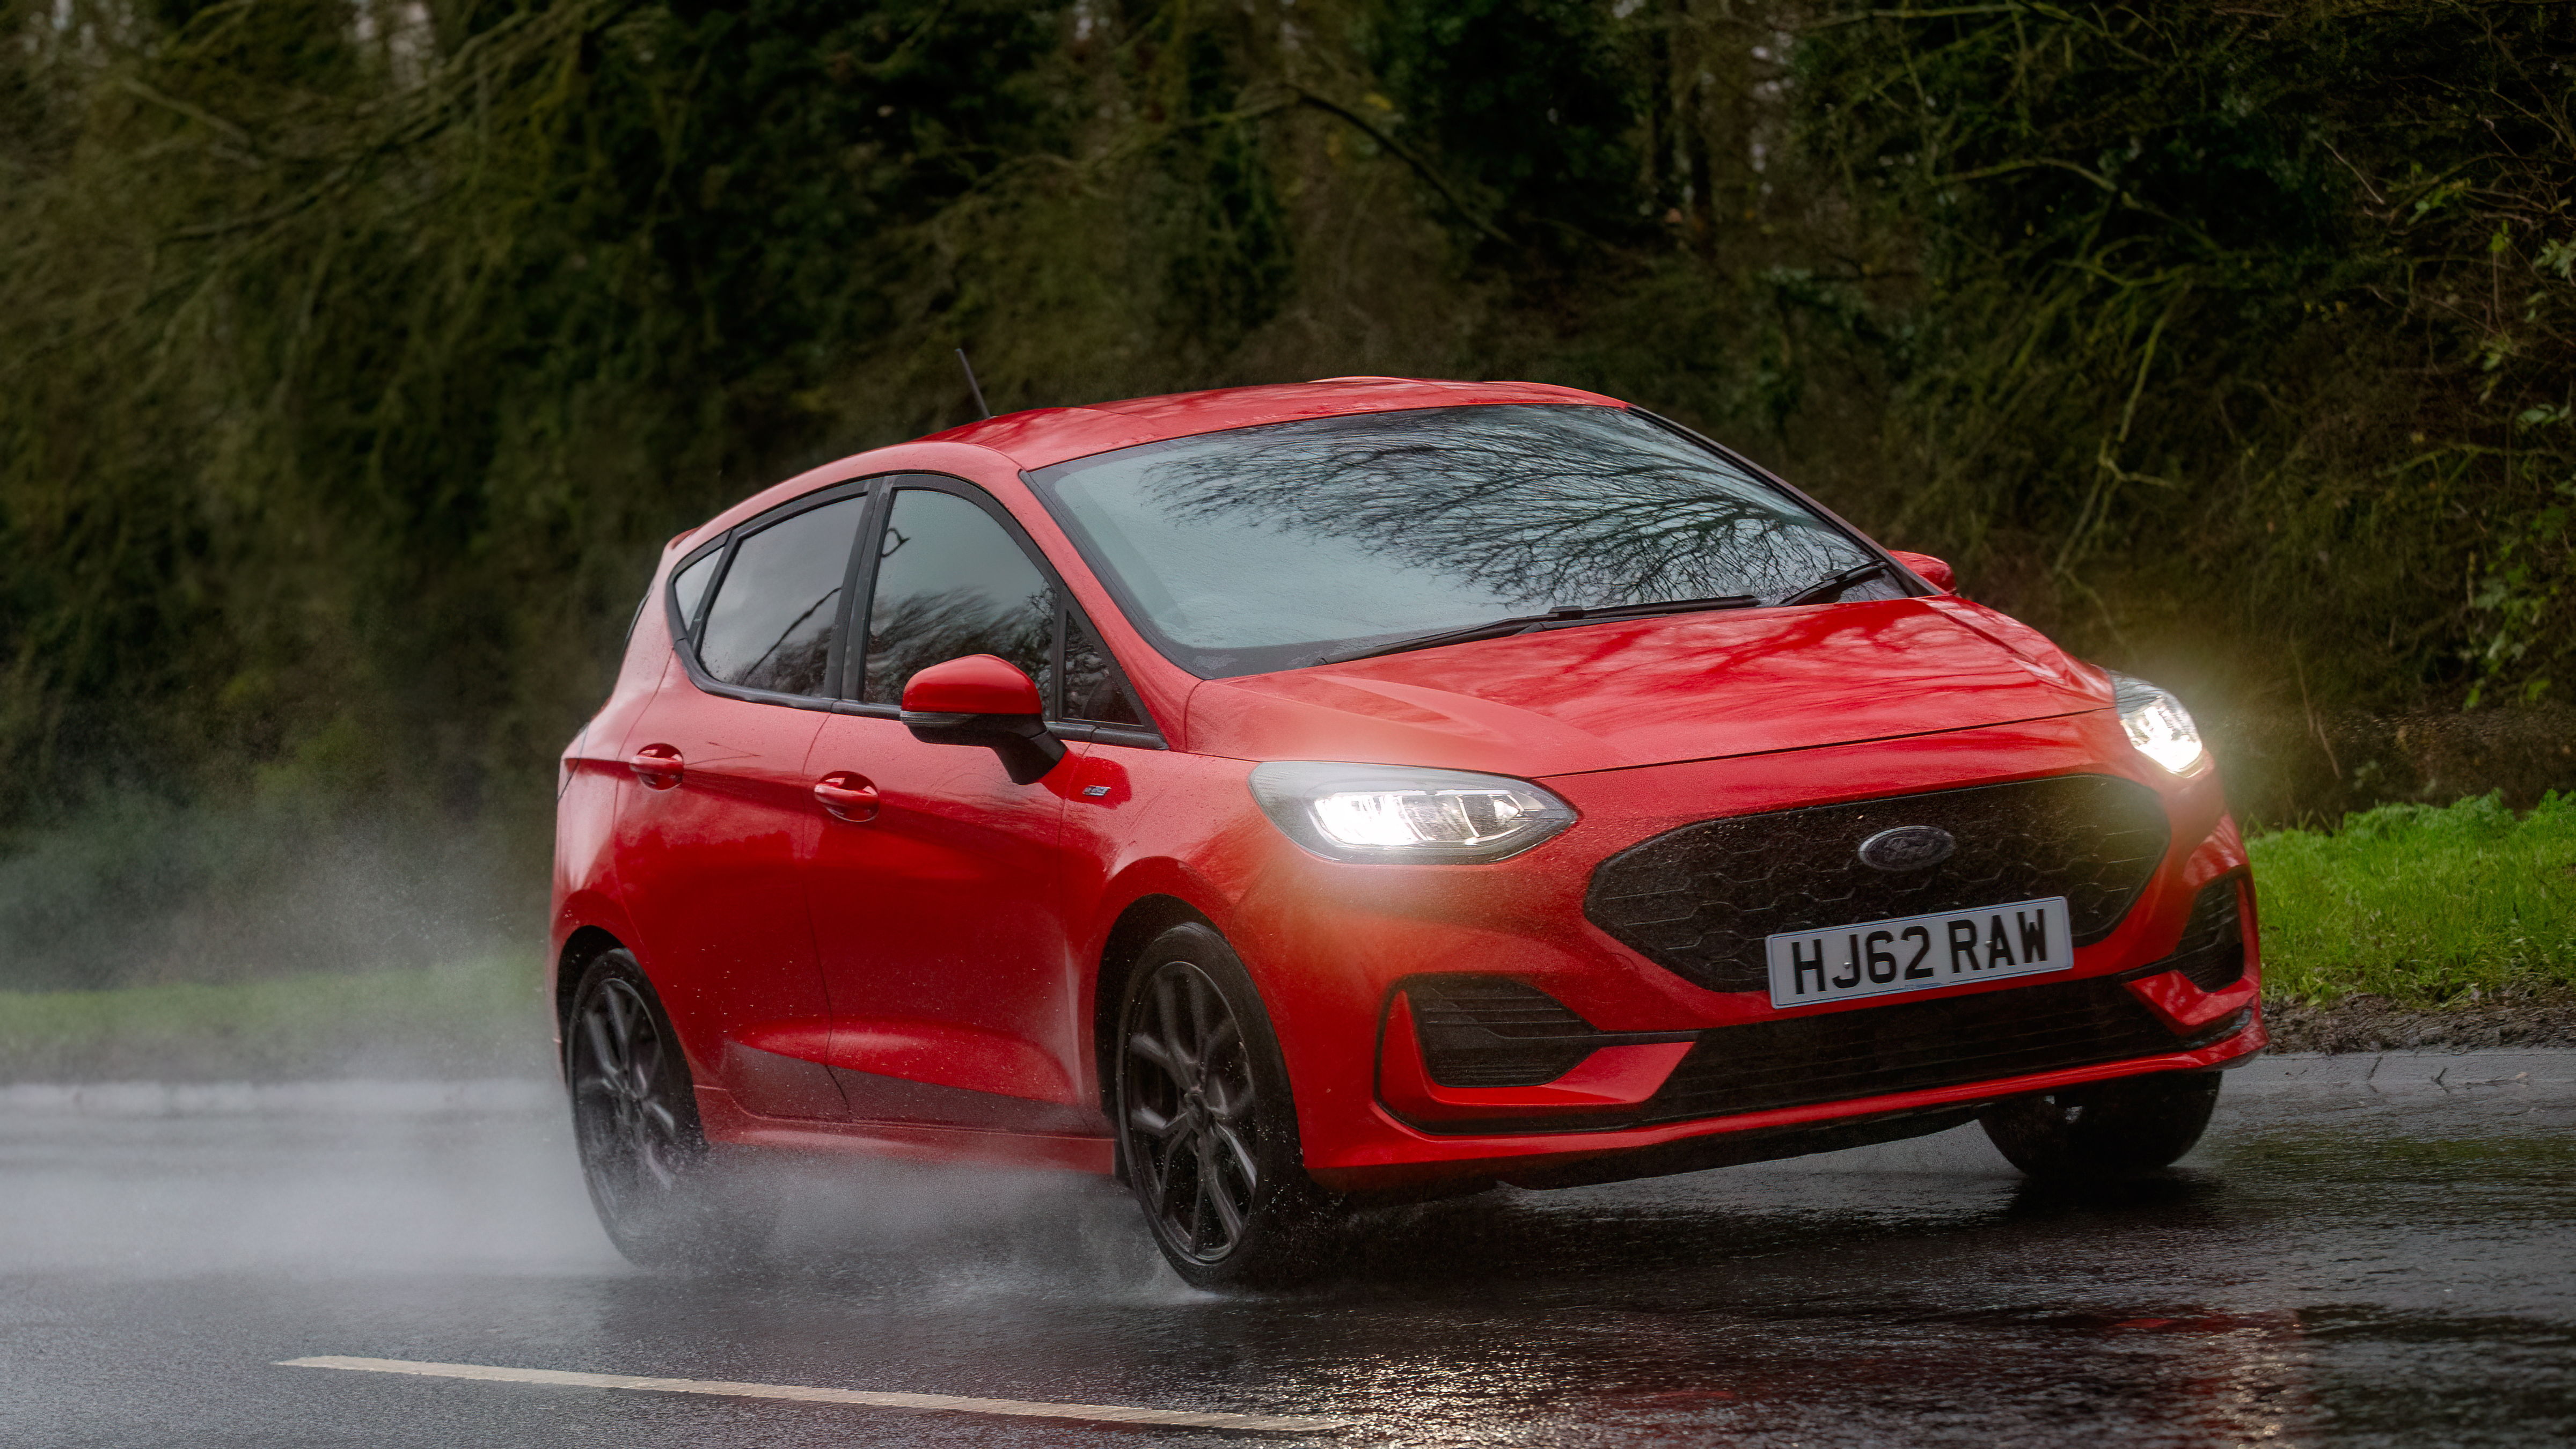 A Ford Fiesta offers a more sportier vibe